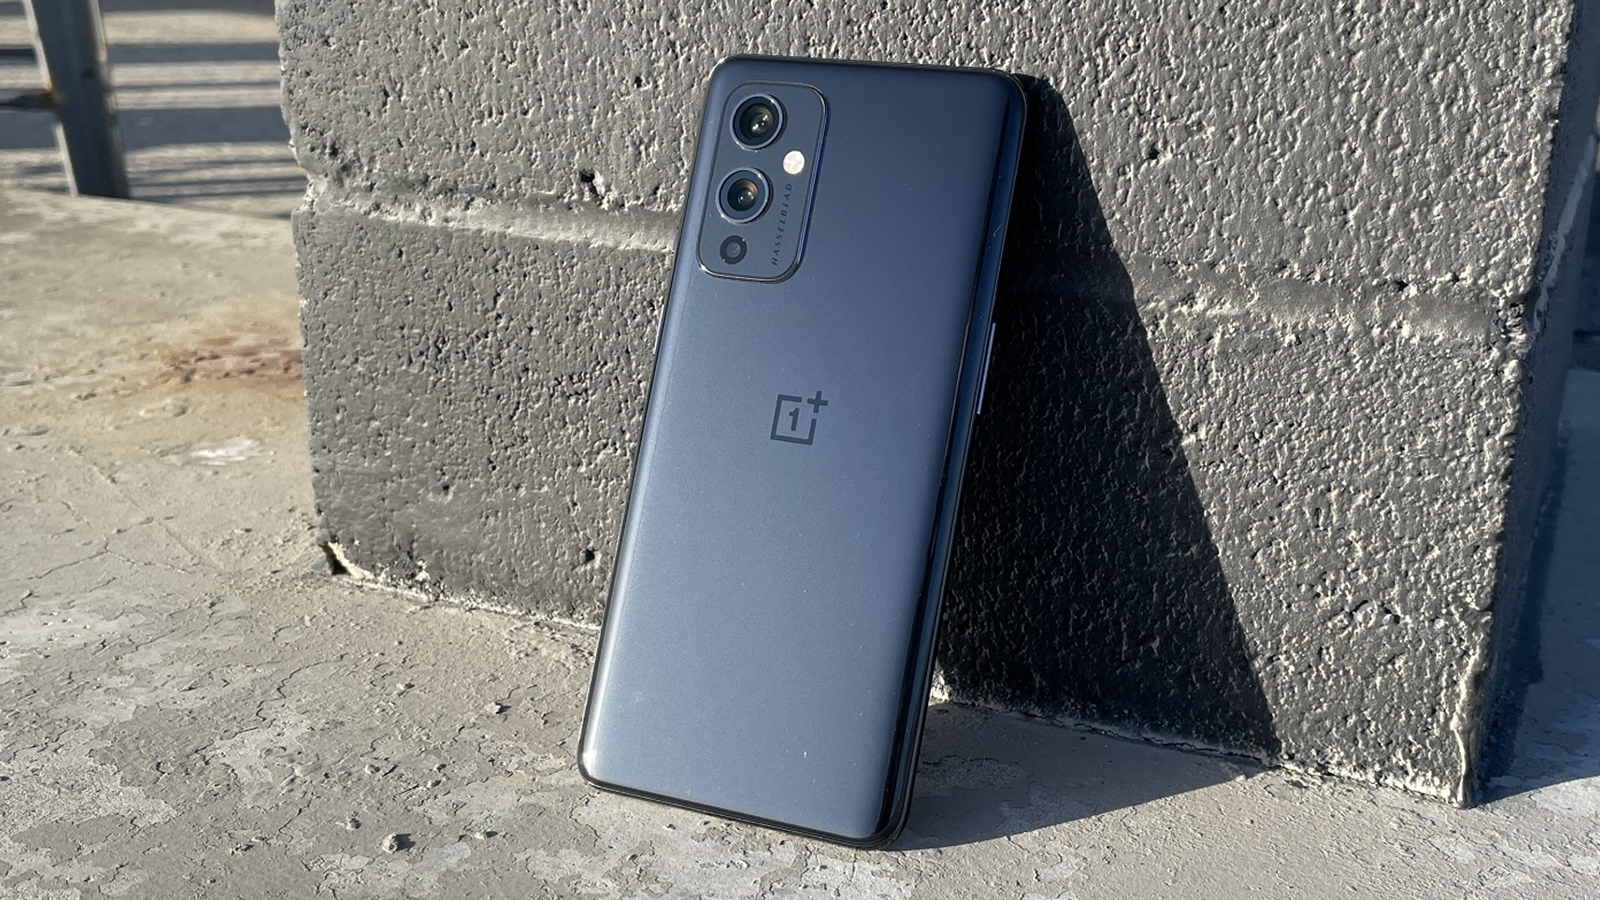 OnePlus once extra caught attempting to manipulate benchmark rankings